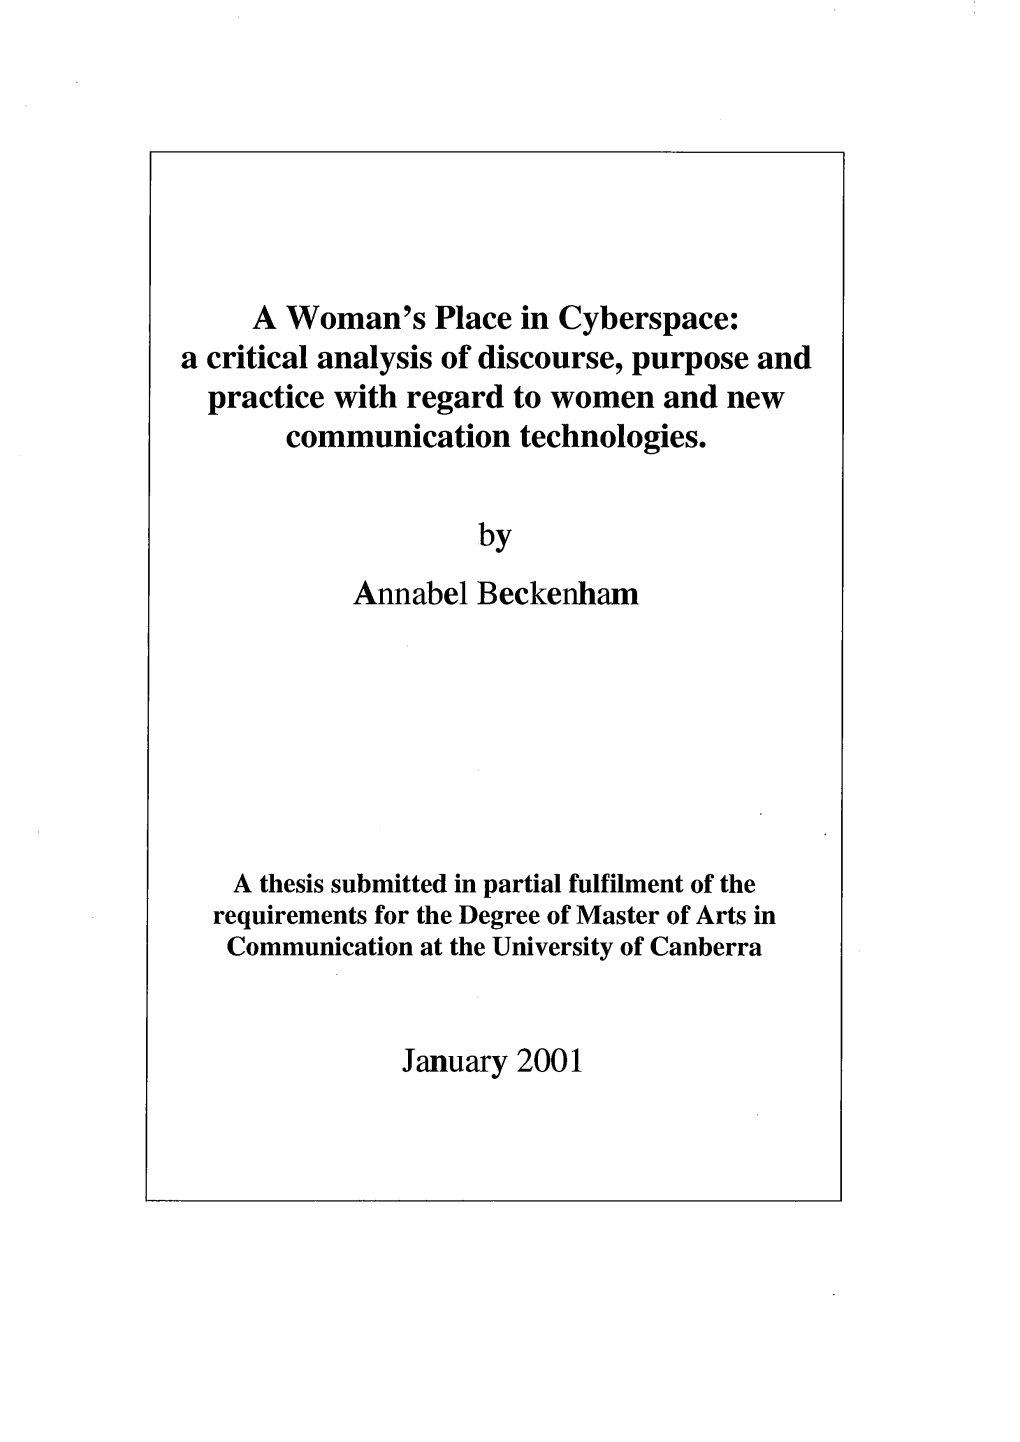 A Critical Analysis of Discourse, Purpose and Practice with Regard to Women and New Communication Technologies